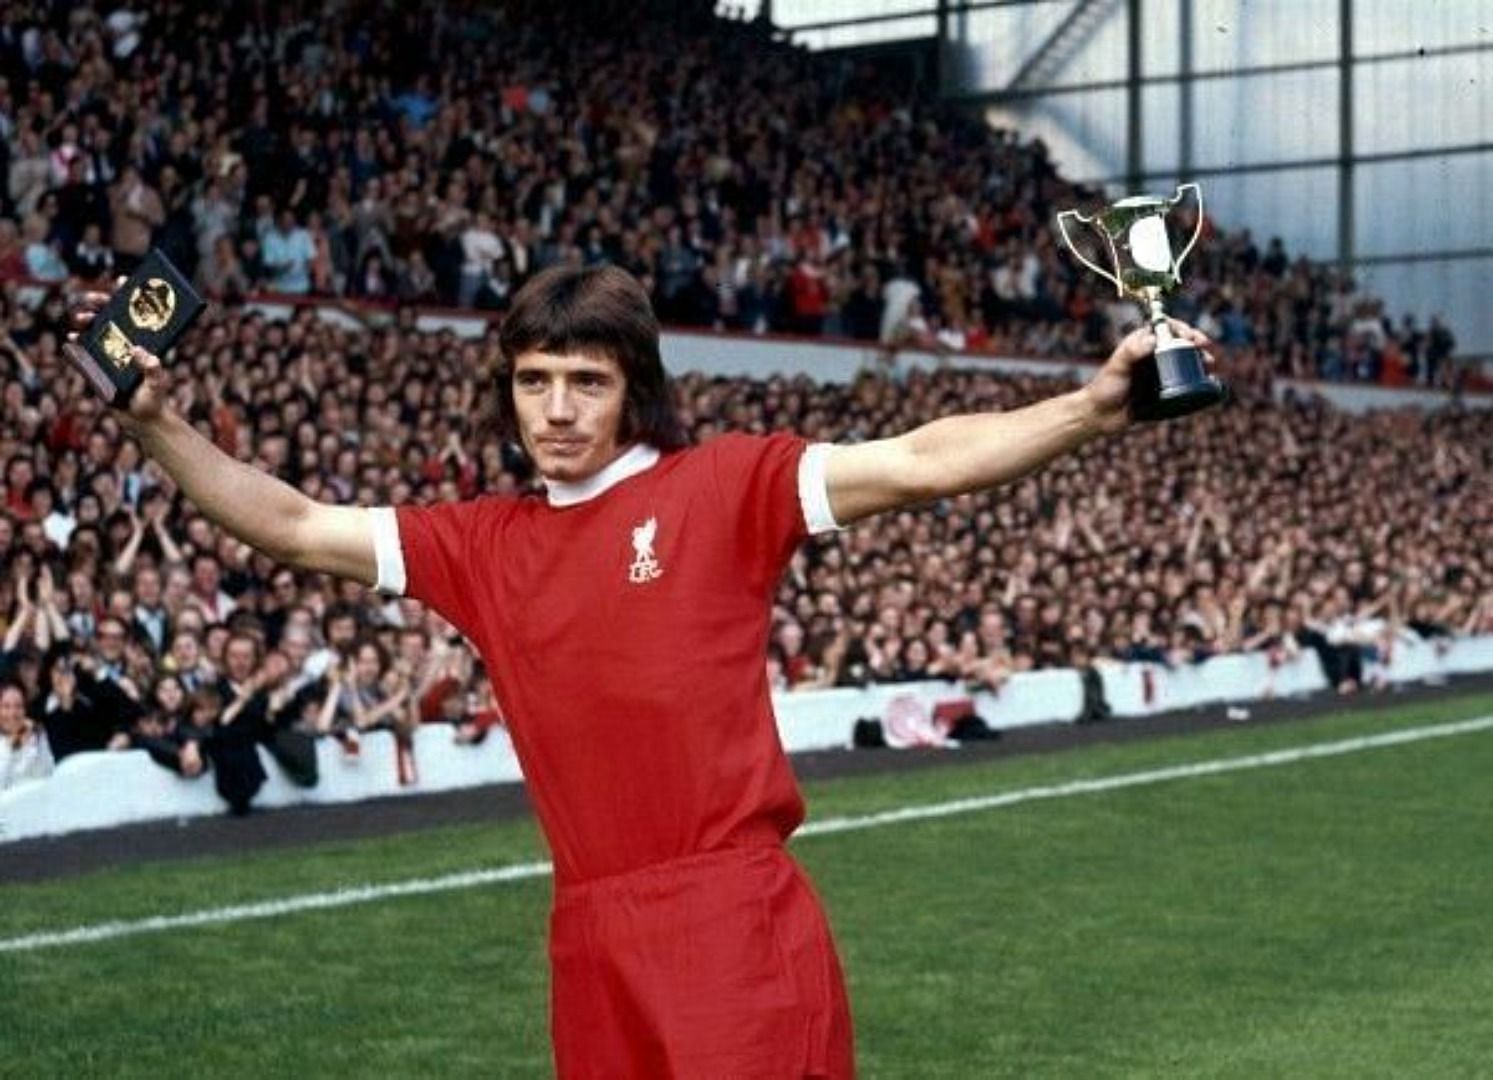 The history of Liverpool is incomplete without Kevin Keegan.